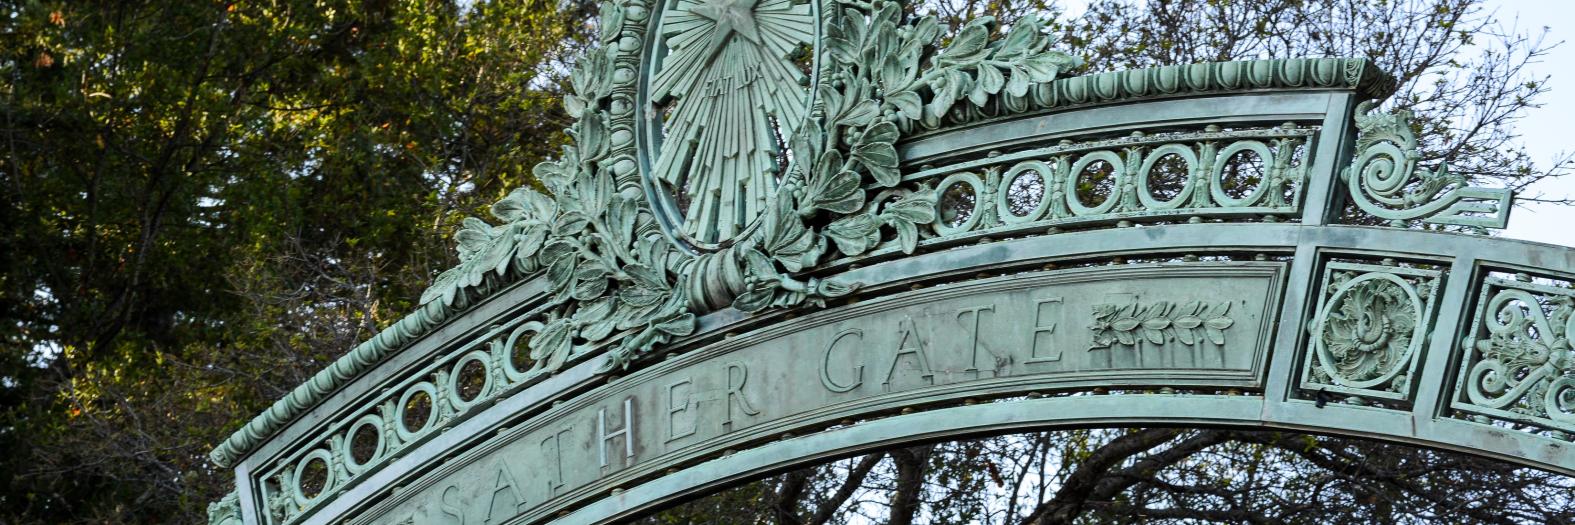 Sather Gate